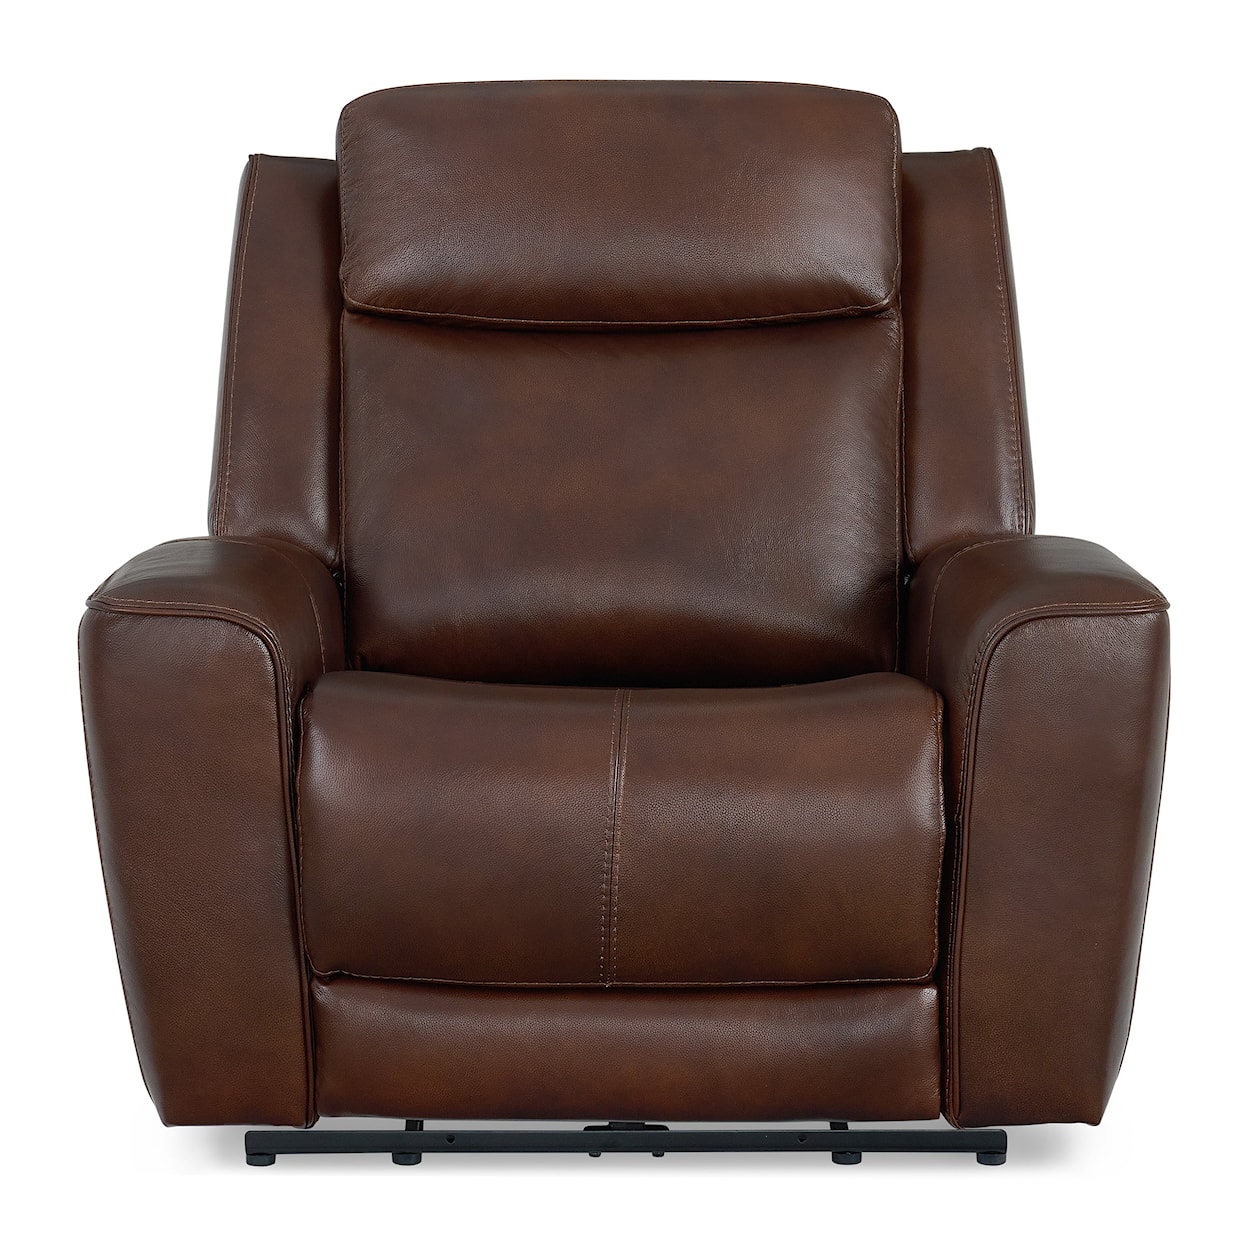 Kuka Home KMT6150 P2 Leather Recliner